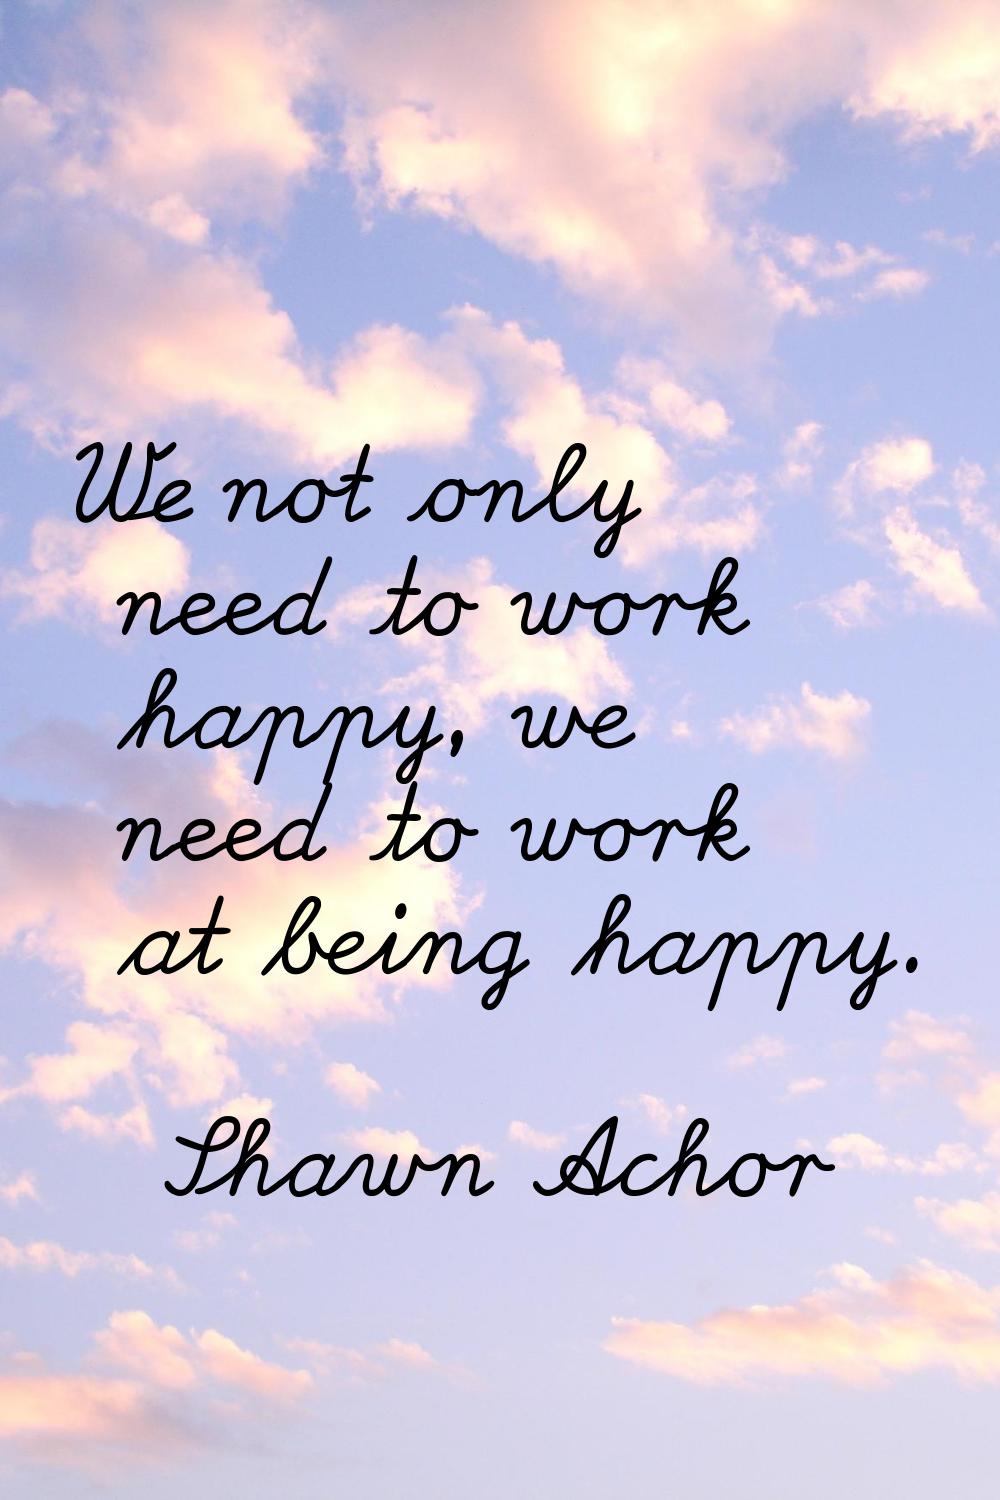 We not only need to work happy, we need to work at being happy.